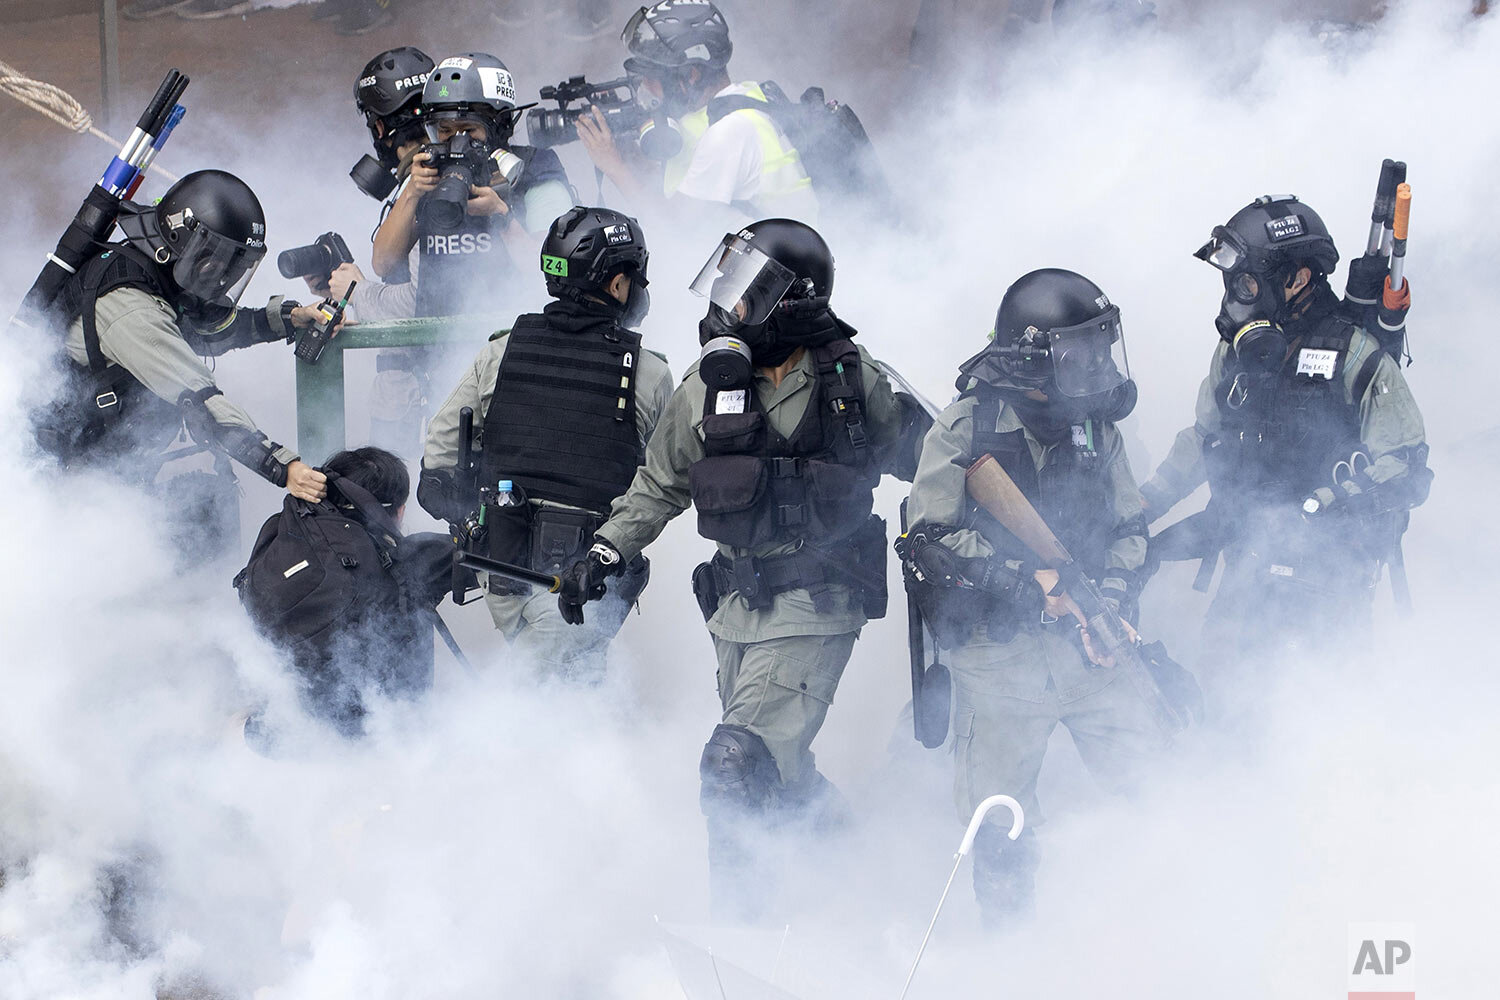  Police in riot gear move through a cloud of smoke as they detain a protester at the Hong Kong Polytechnic University in Hong Kong, Monday, Nov. 18, 2019. Hong Kong police fought off protesters with tear gas and batons Monday as they tried to break t